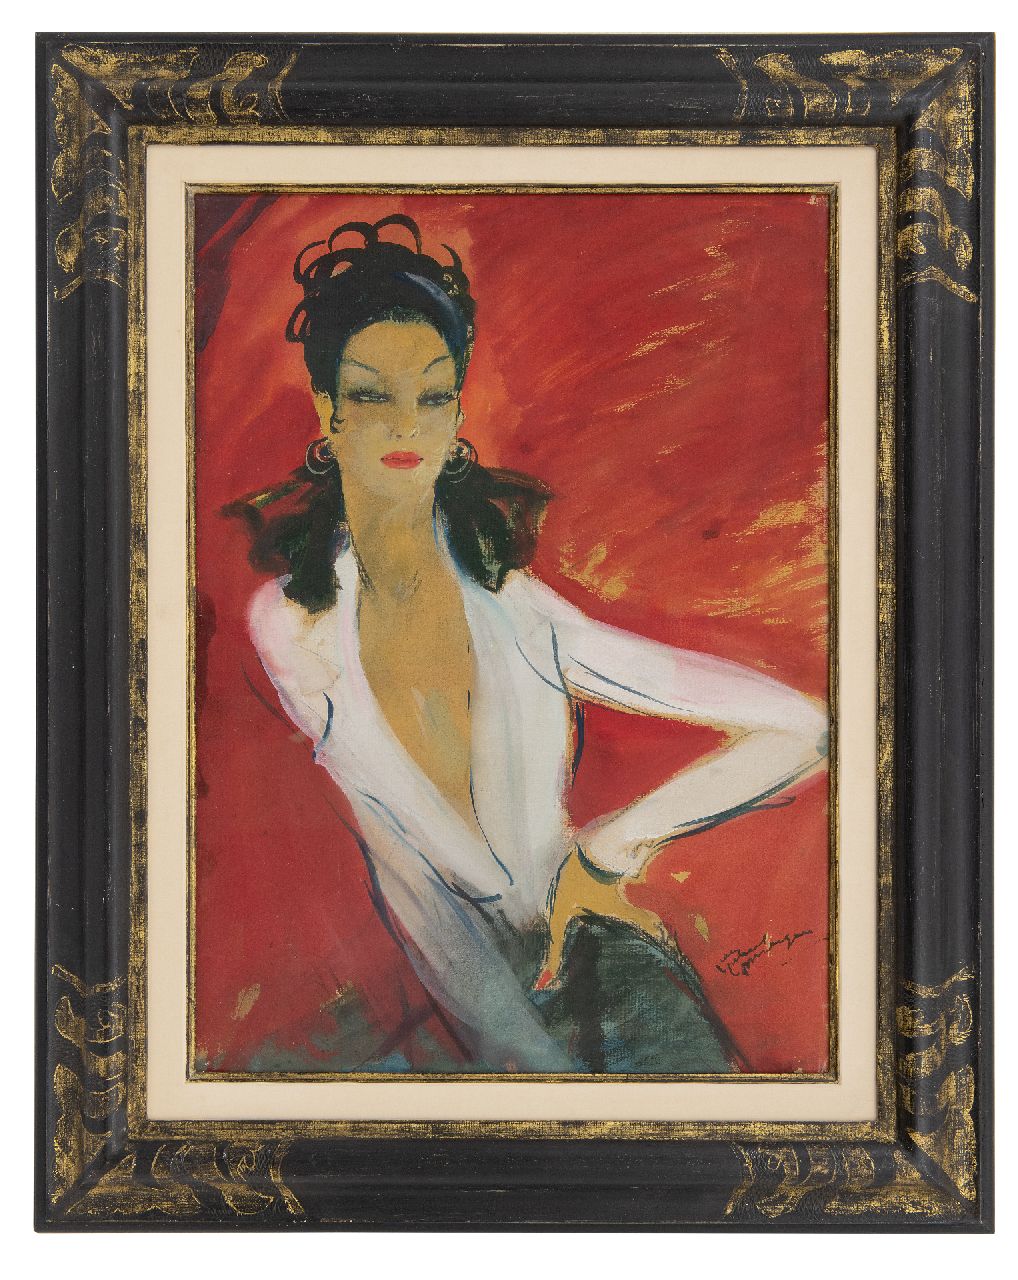 Domergue J.G.  | Jean-Gabriel Domergue | Watercolours and drawings offered for sale | Agnes in a white blouse, gouache on paper 52.0 x 38.0 cm, signed l.r.